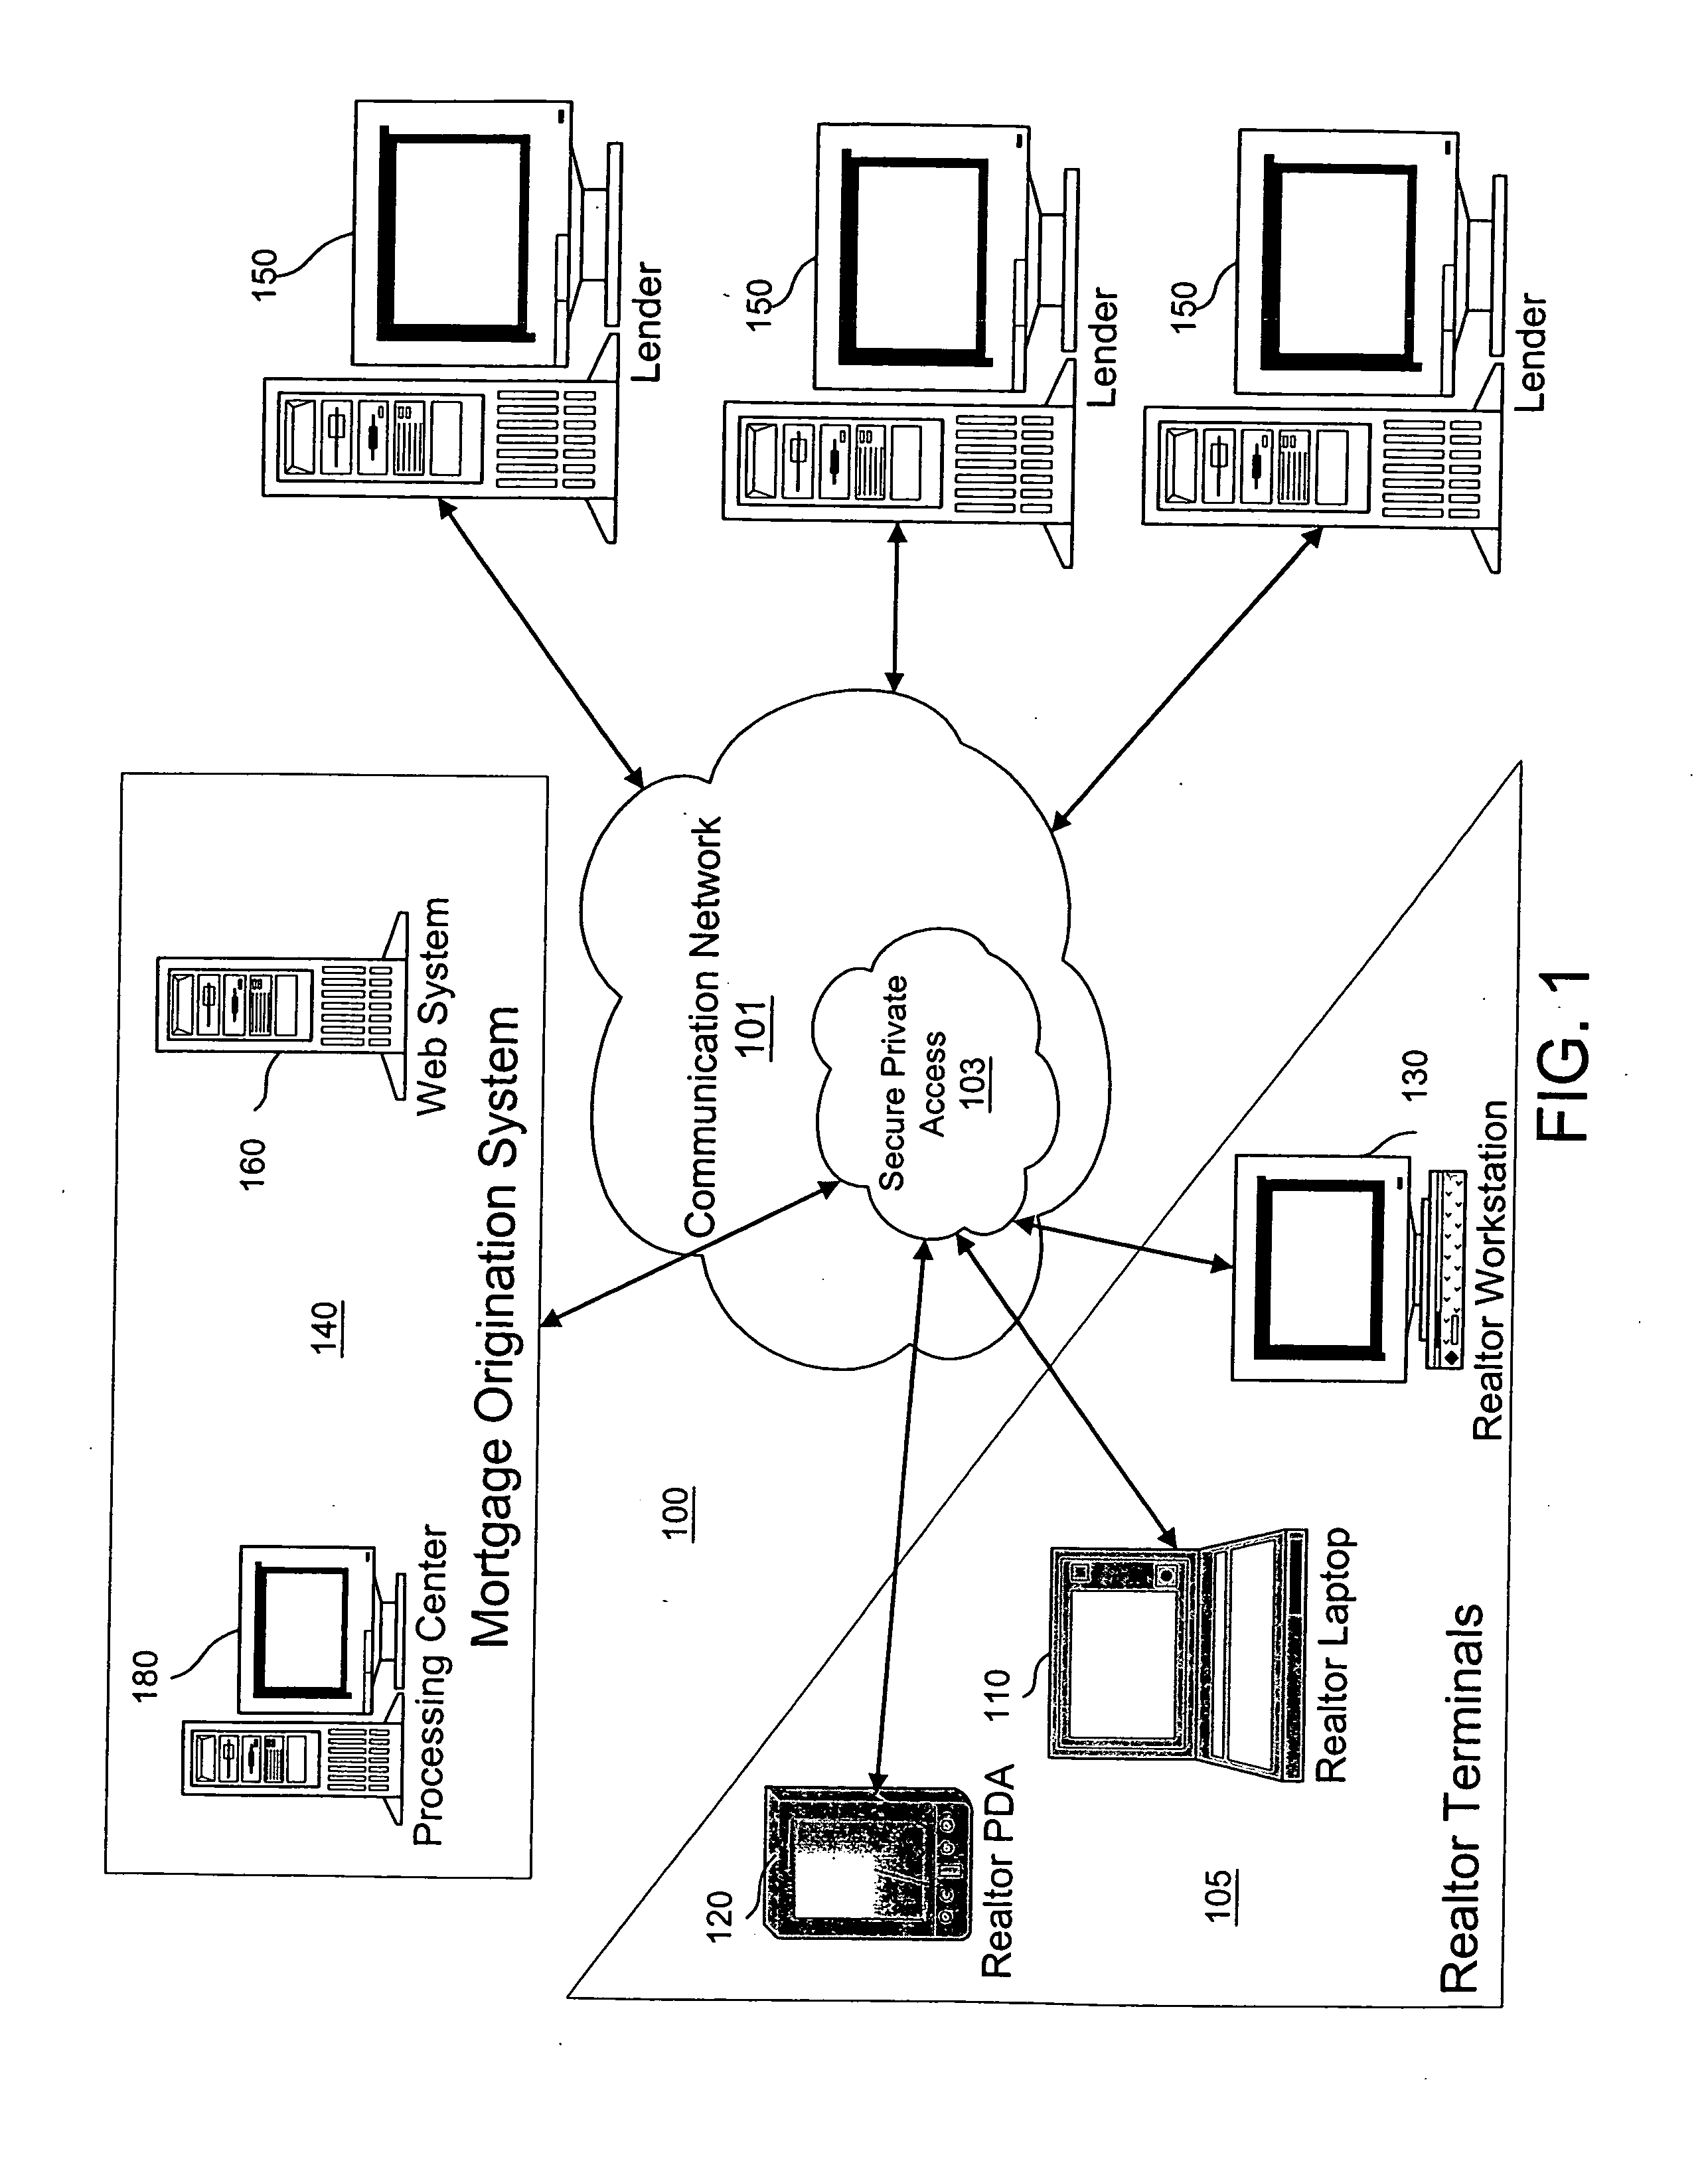 System and method for facilitating realtor-assisted loan shopping and origination